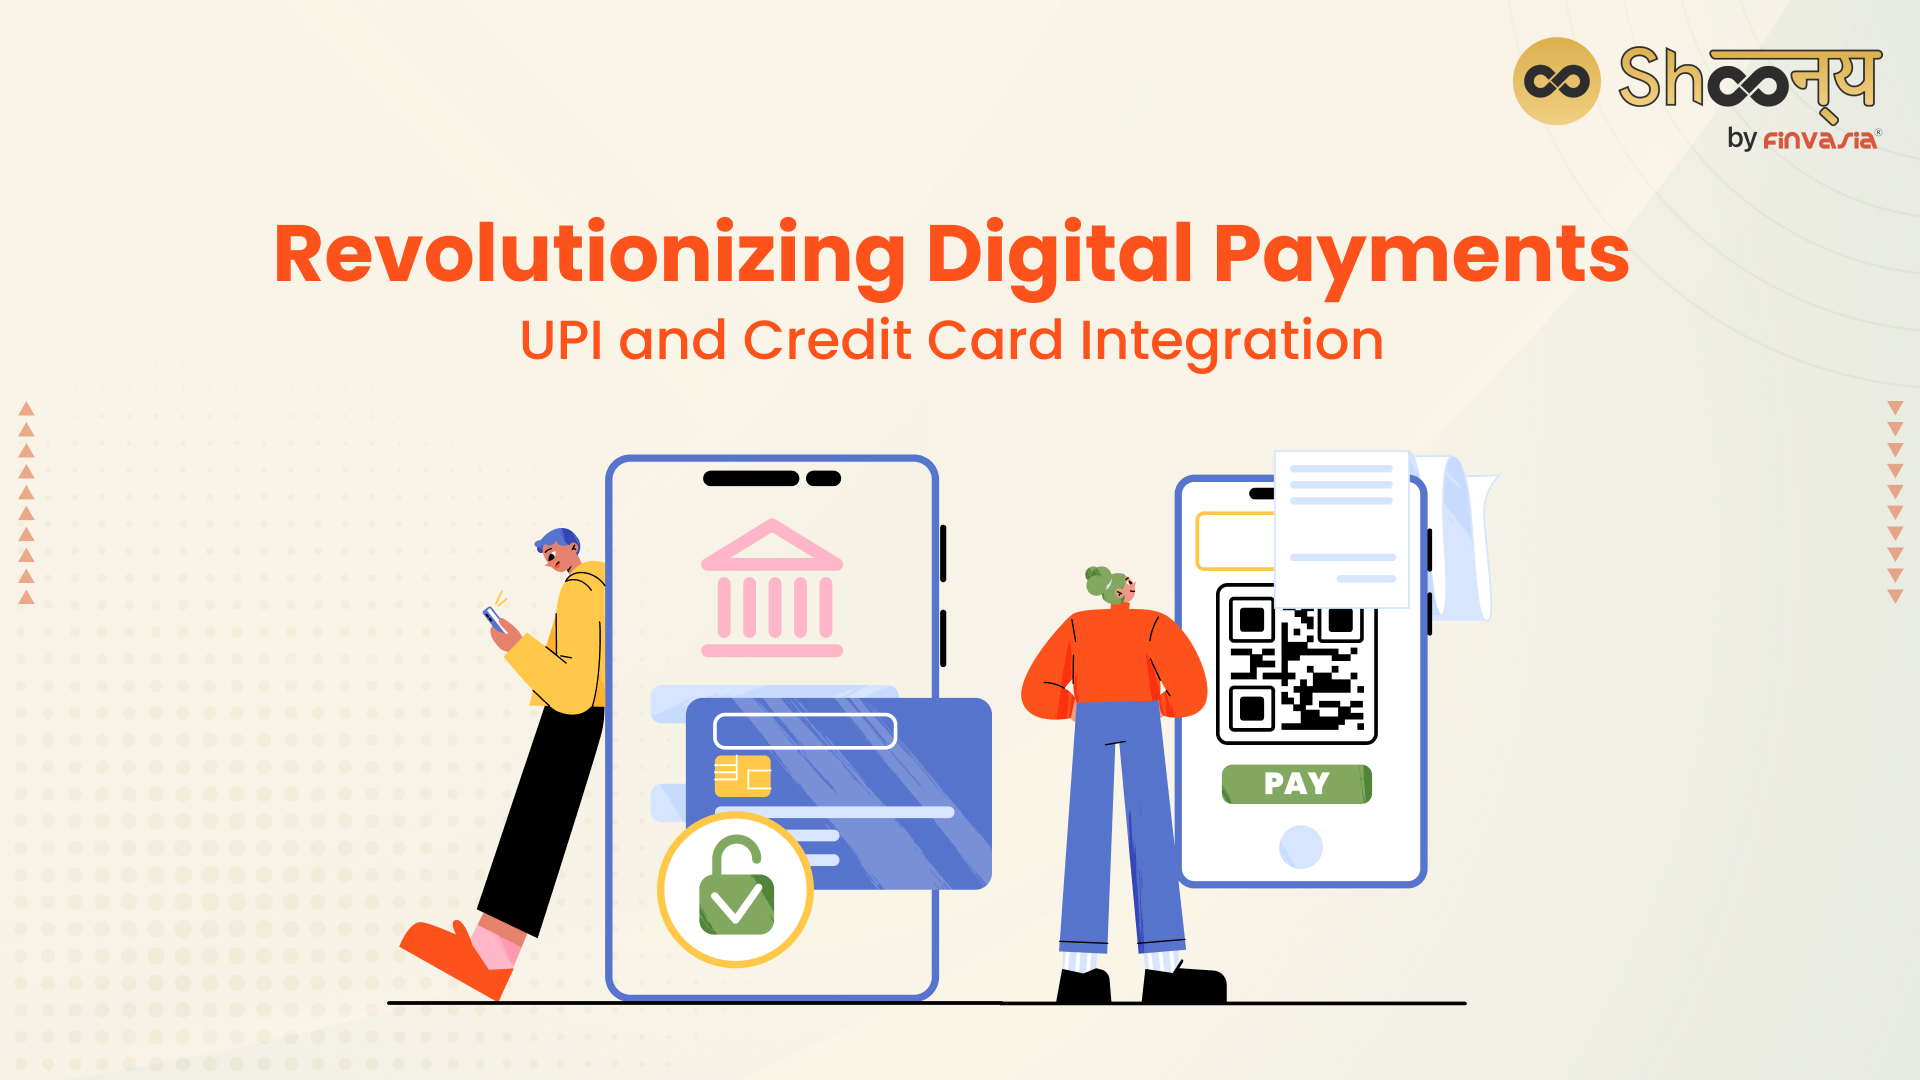 Linking Credit Cards with UPI: Exploring Credit Options